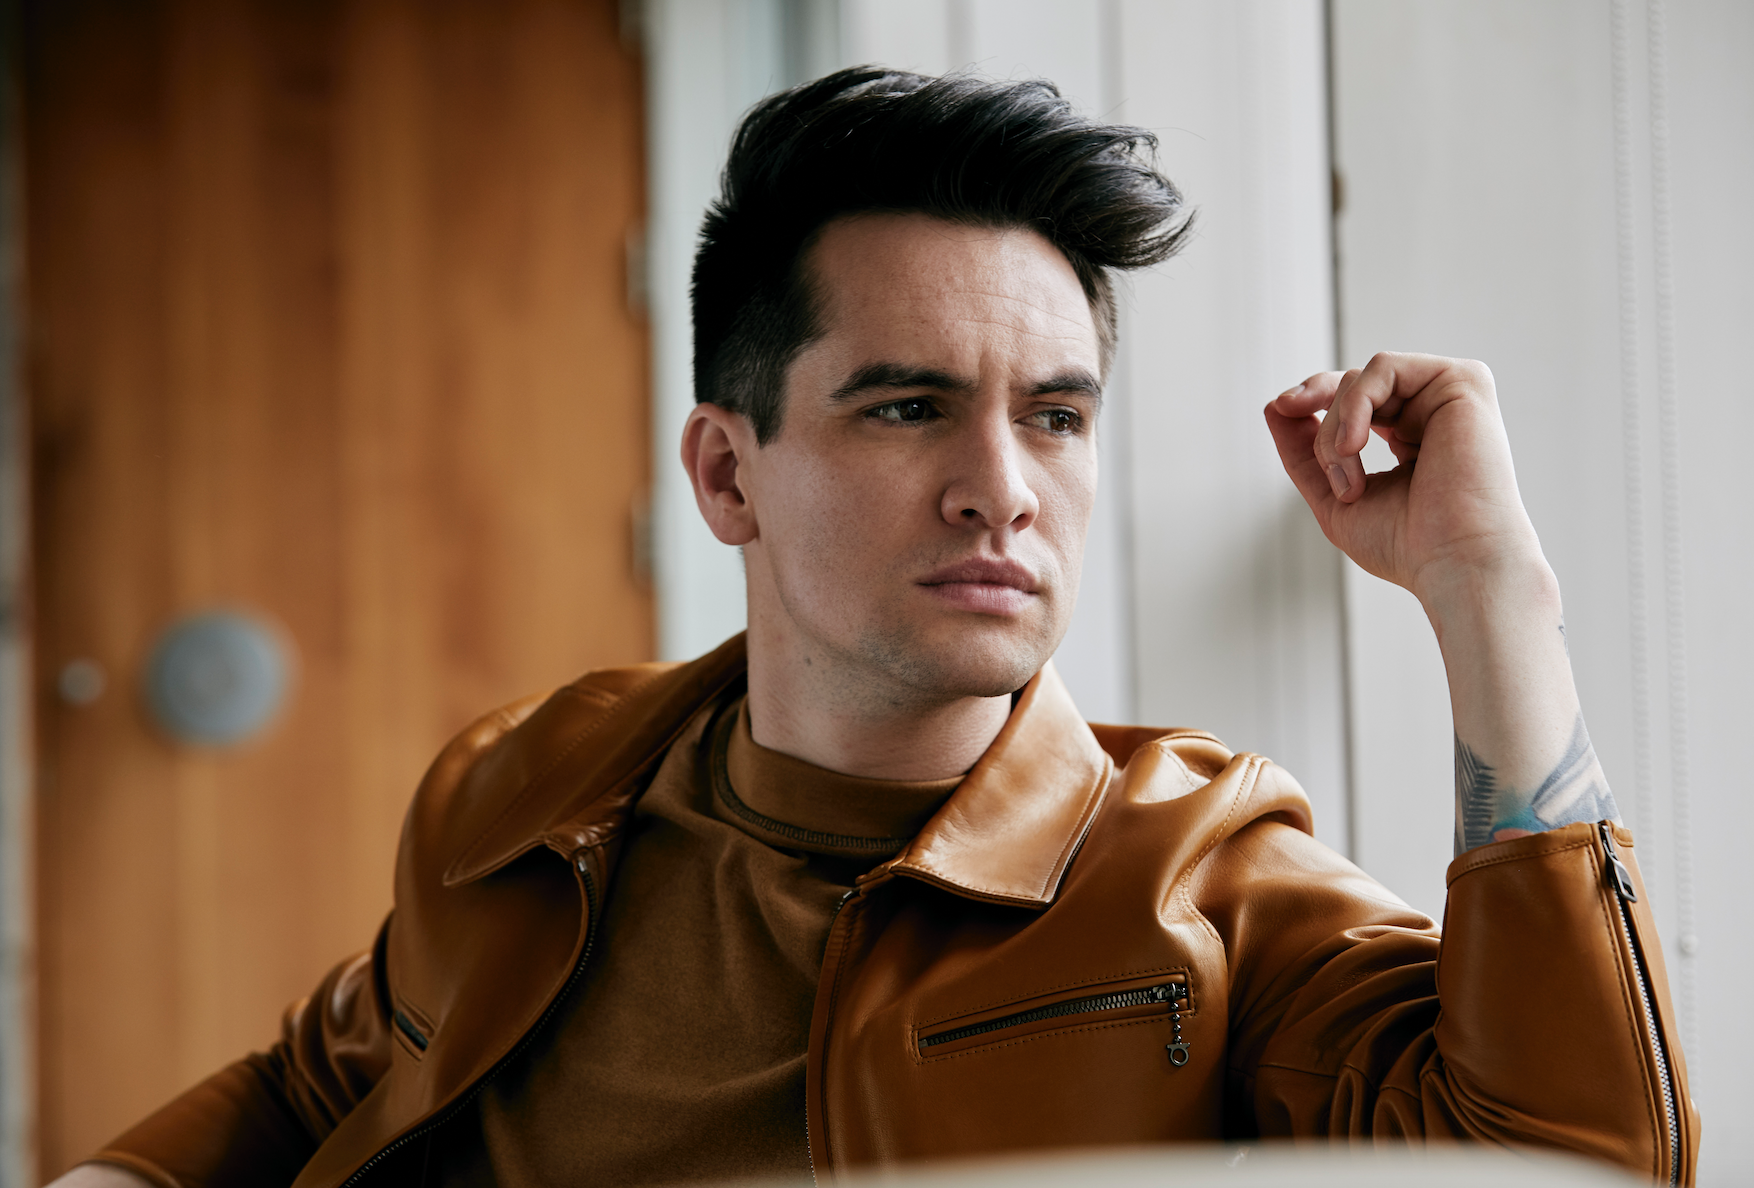 Brendon Urie Panic At The Disco Wallpaper / At the disco, panic